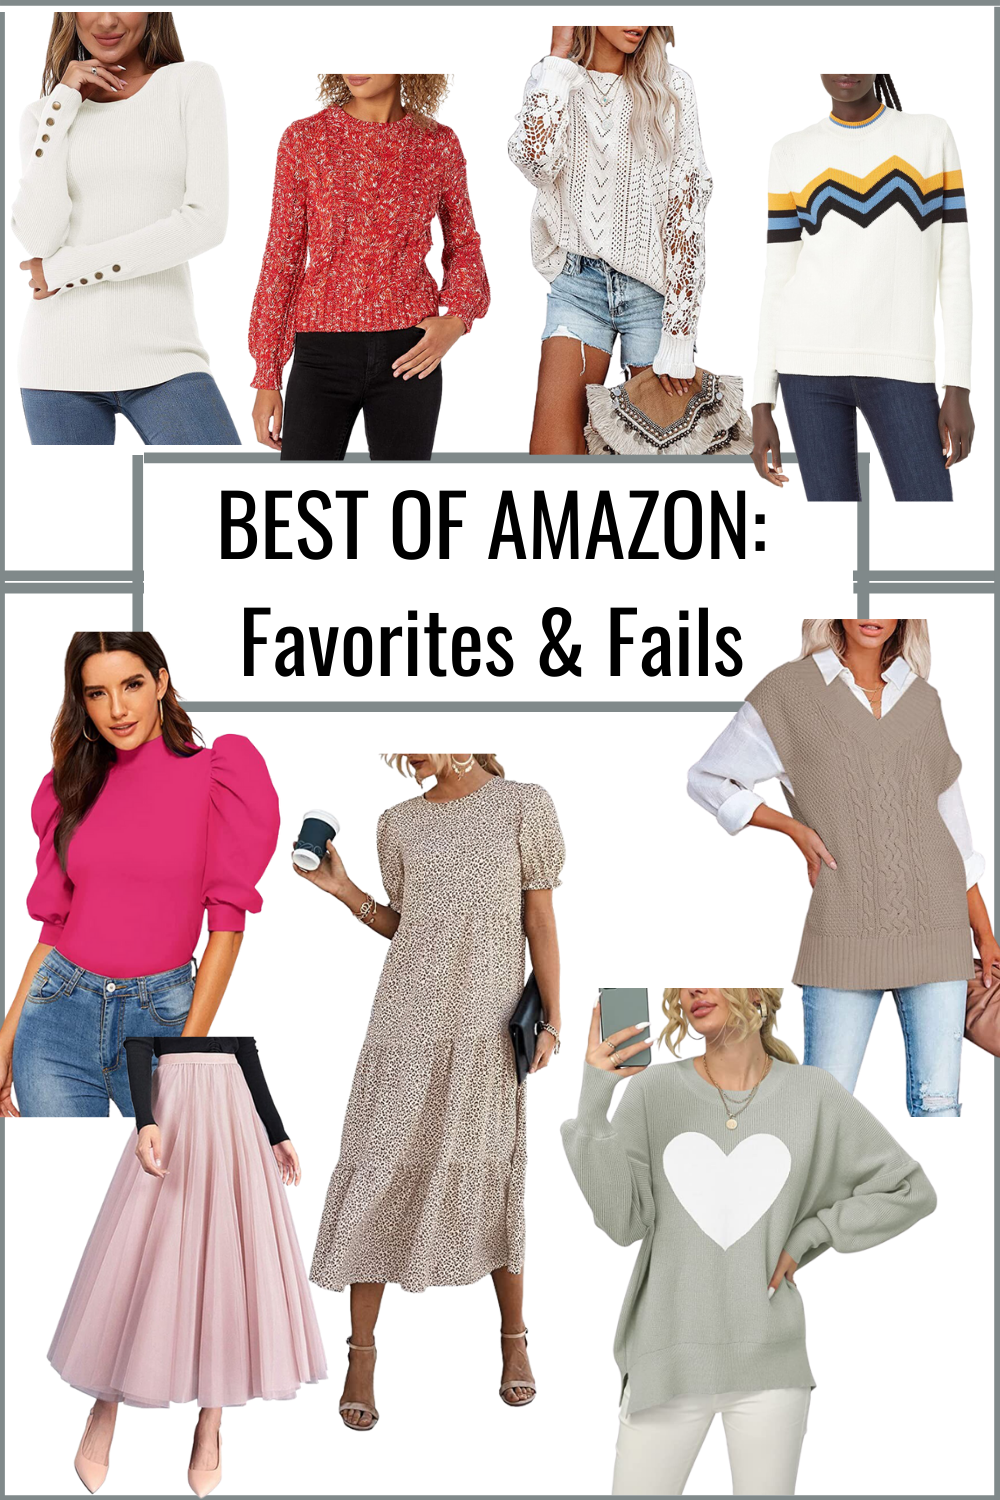 BEST OF AMAZON: FAVORITES AND FAILS